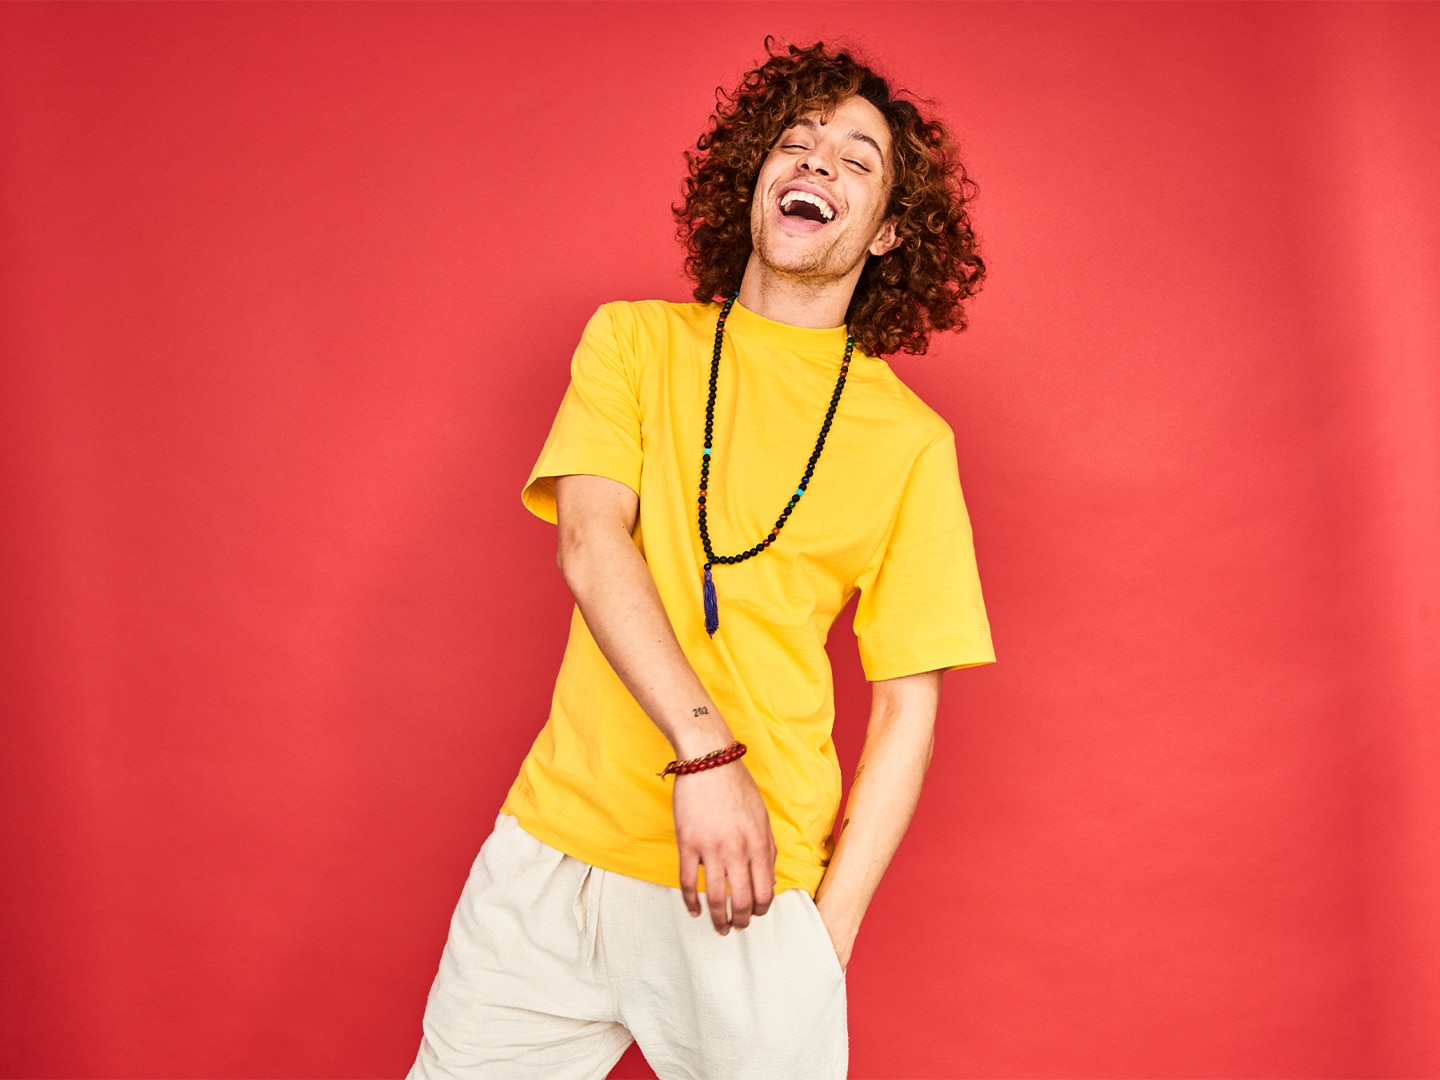 Guy in yellow tshirt laughing against red background